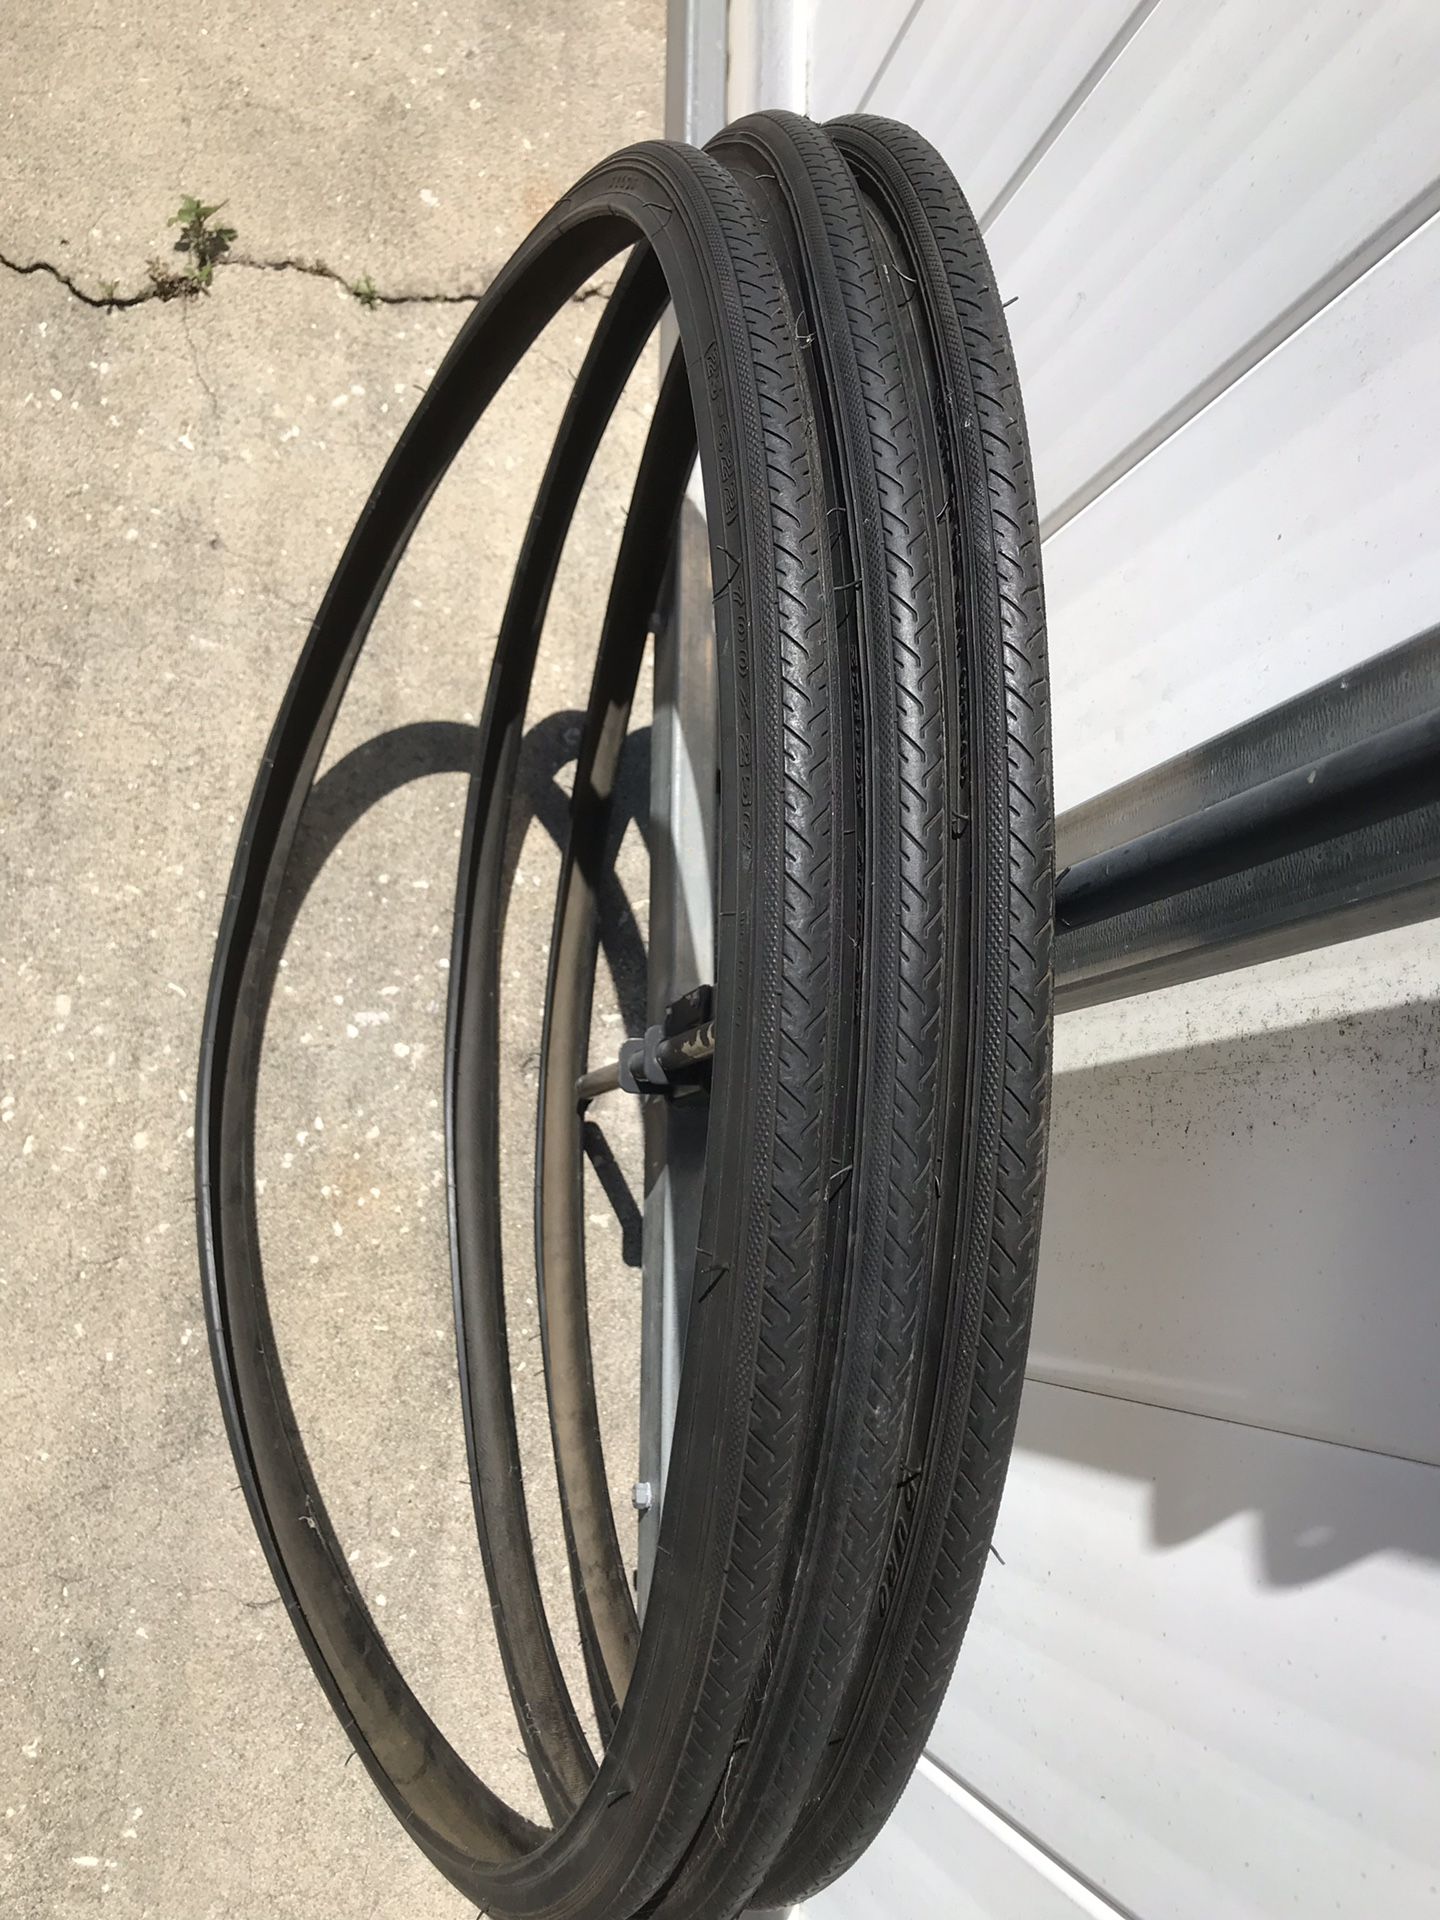 FOR ROAD BIKE. ( TIRE 700x25C ) ((( $ 10. Each ))). SPEEDY ARROW. “NEW, NEVER USED”. PRICE IS FIRM, NO OFFERS.